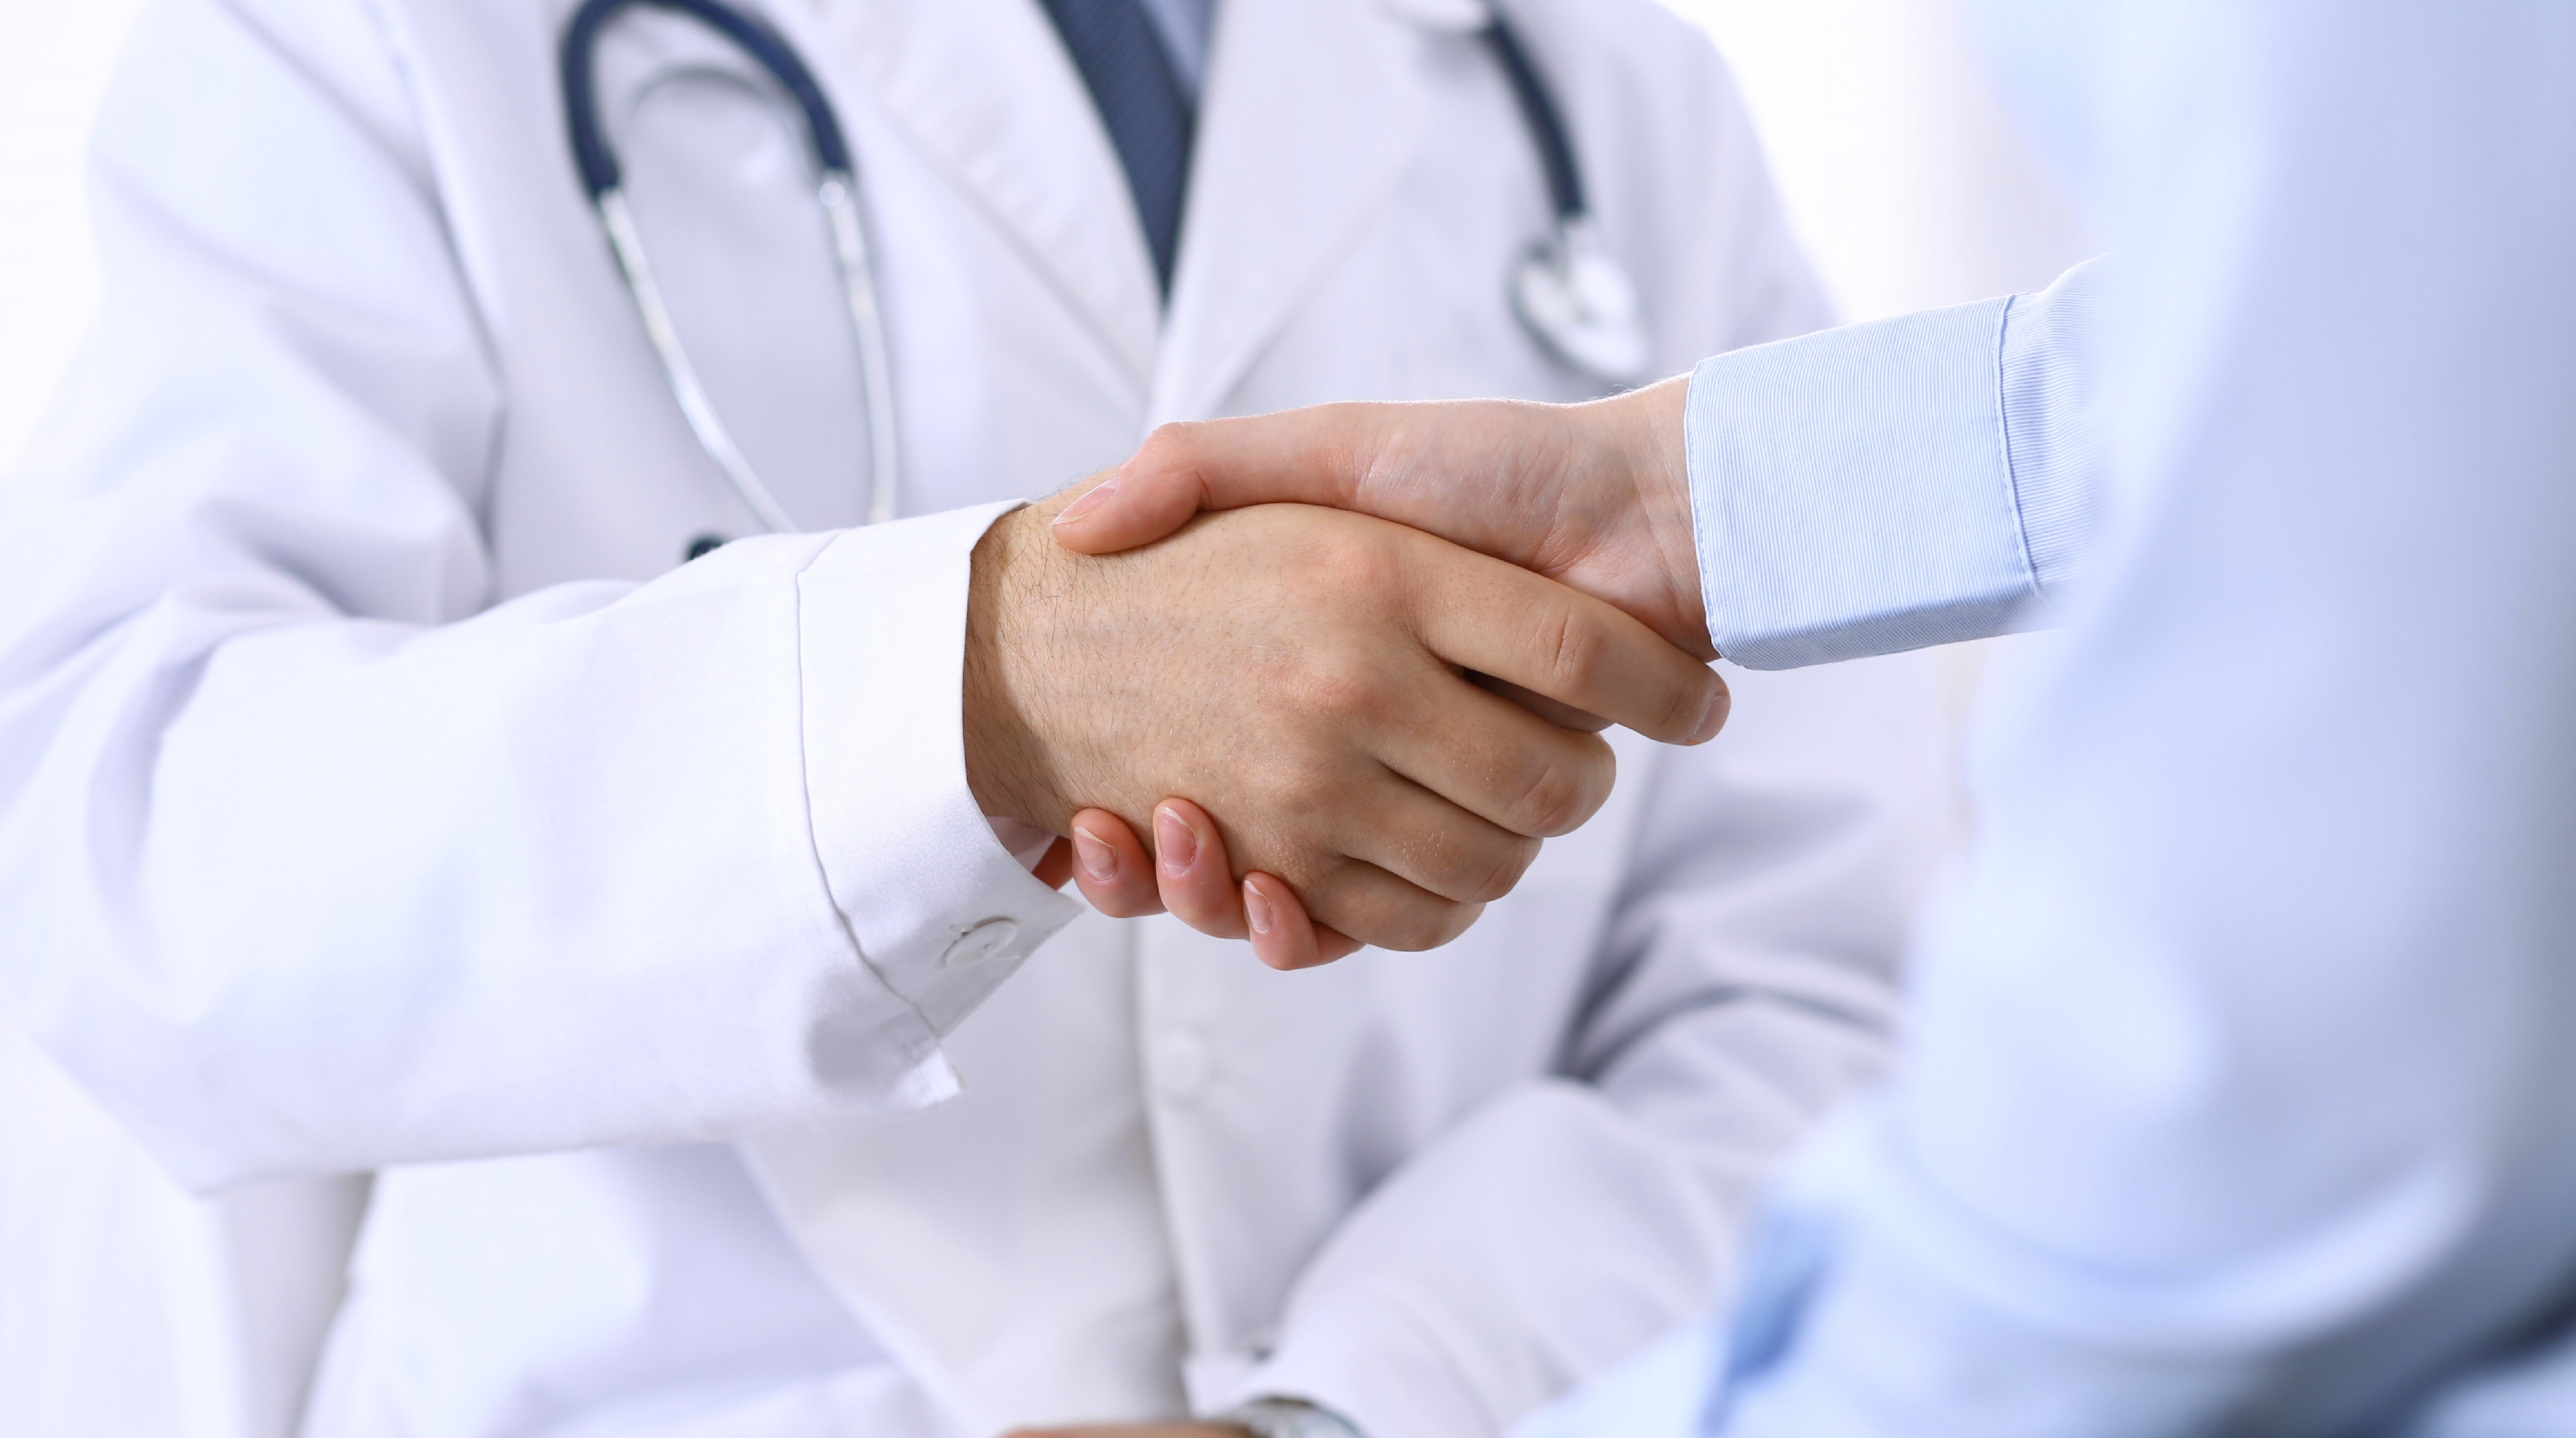 Male doctor and woman patient shaking hands. Partnership in medicine, trust and medical ethics concept.